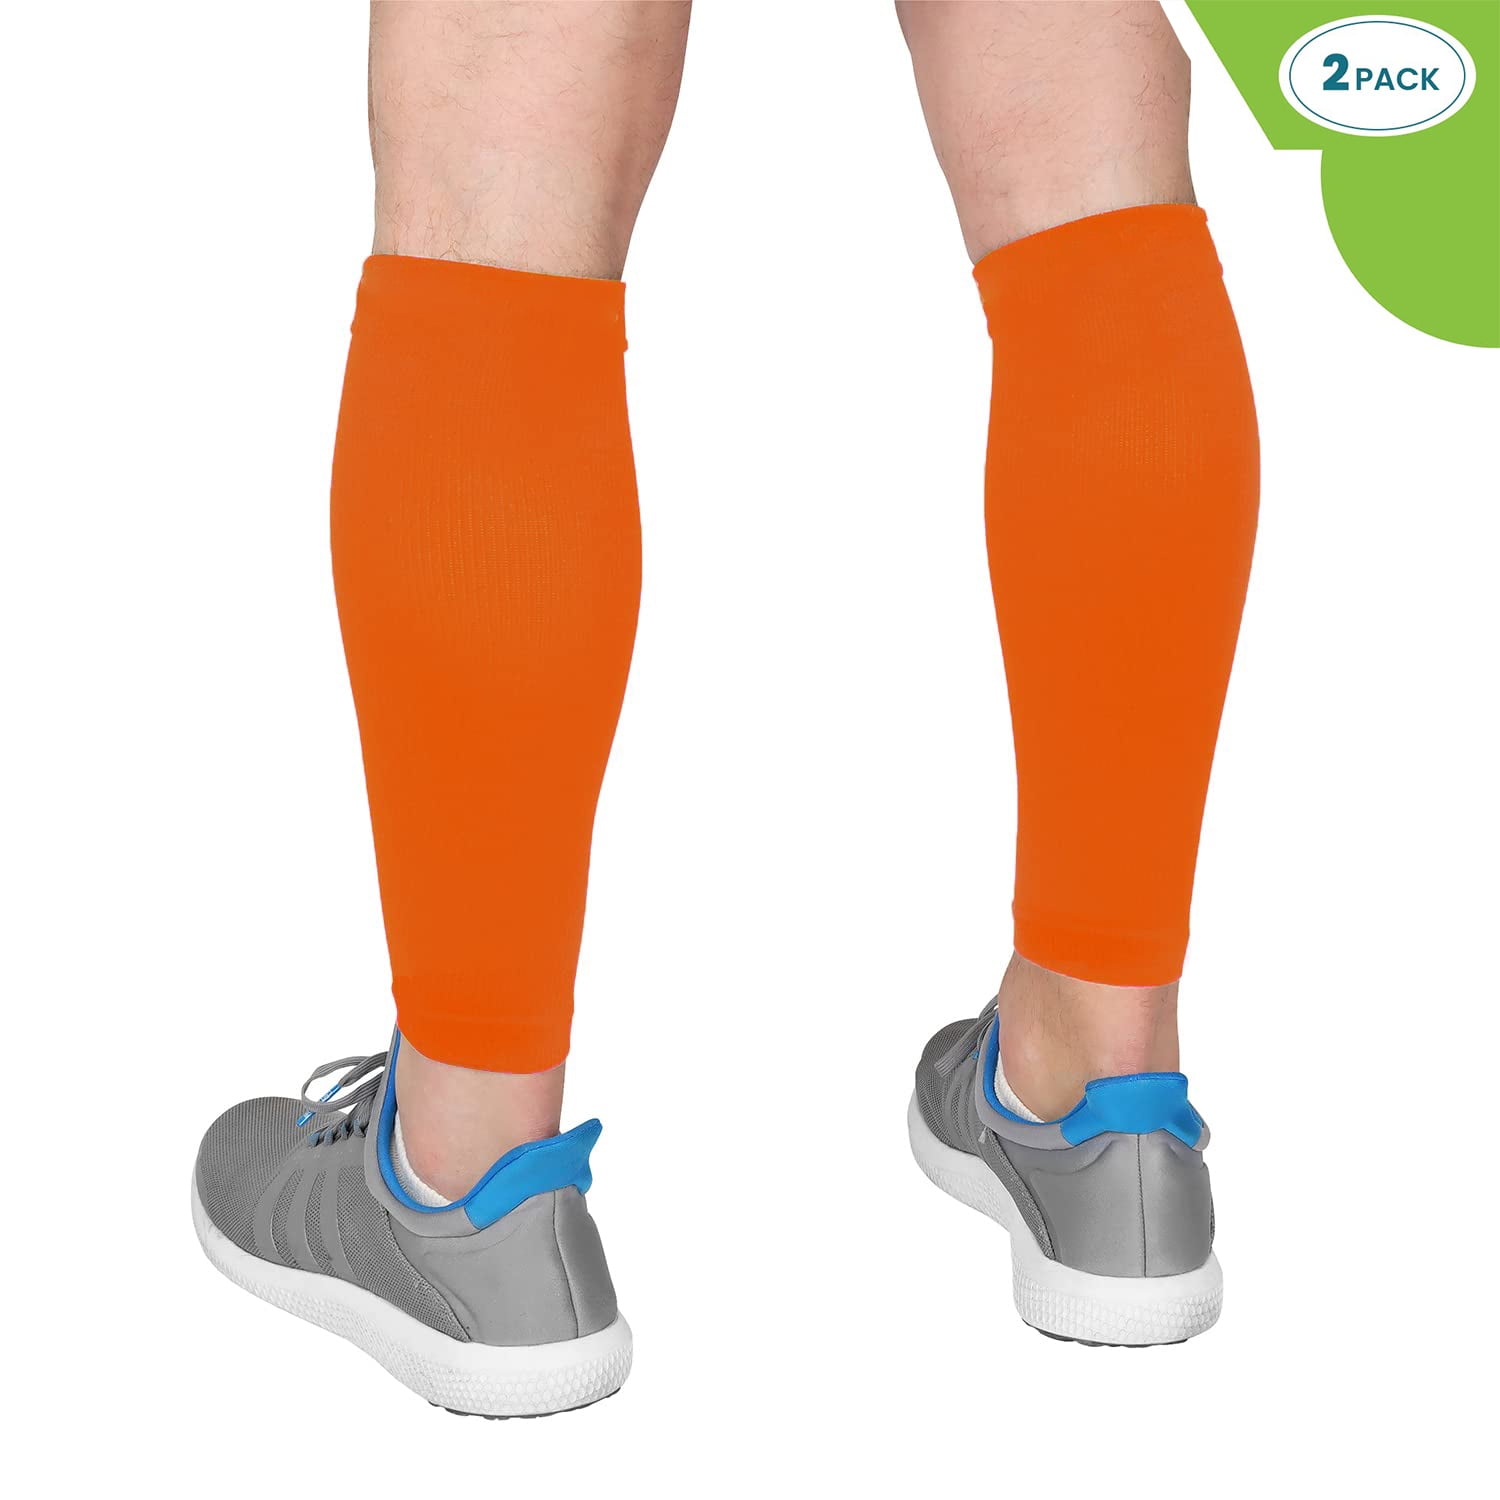 CALF Copper Compression Sleeves by Copper Heal (1 Pair) for